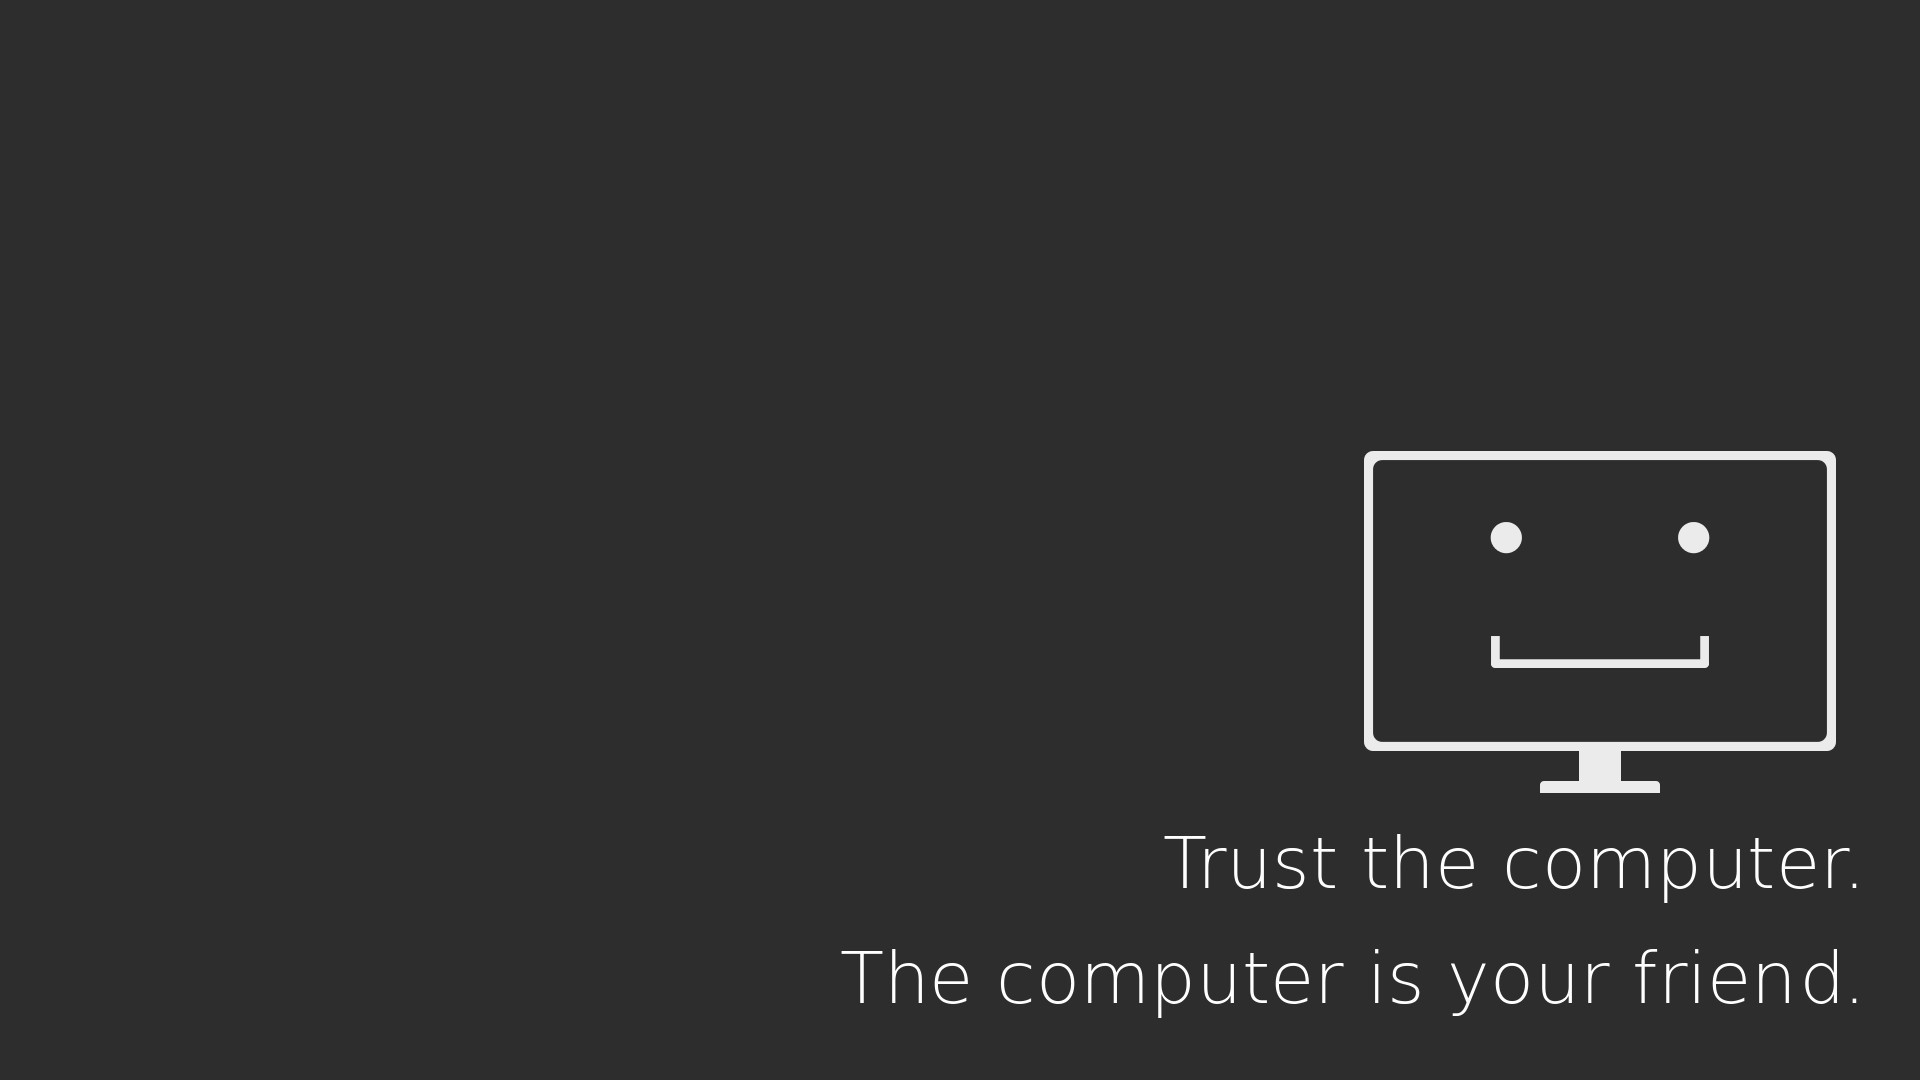 Trust the computer. The computer is your friend.